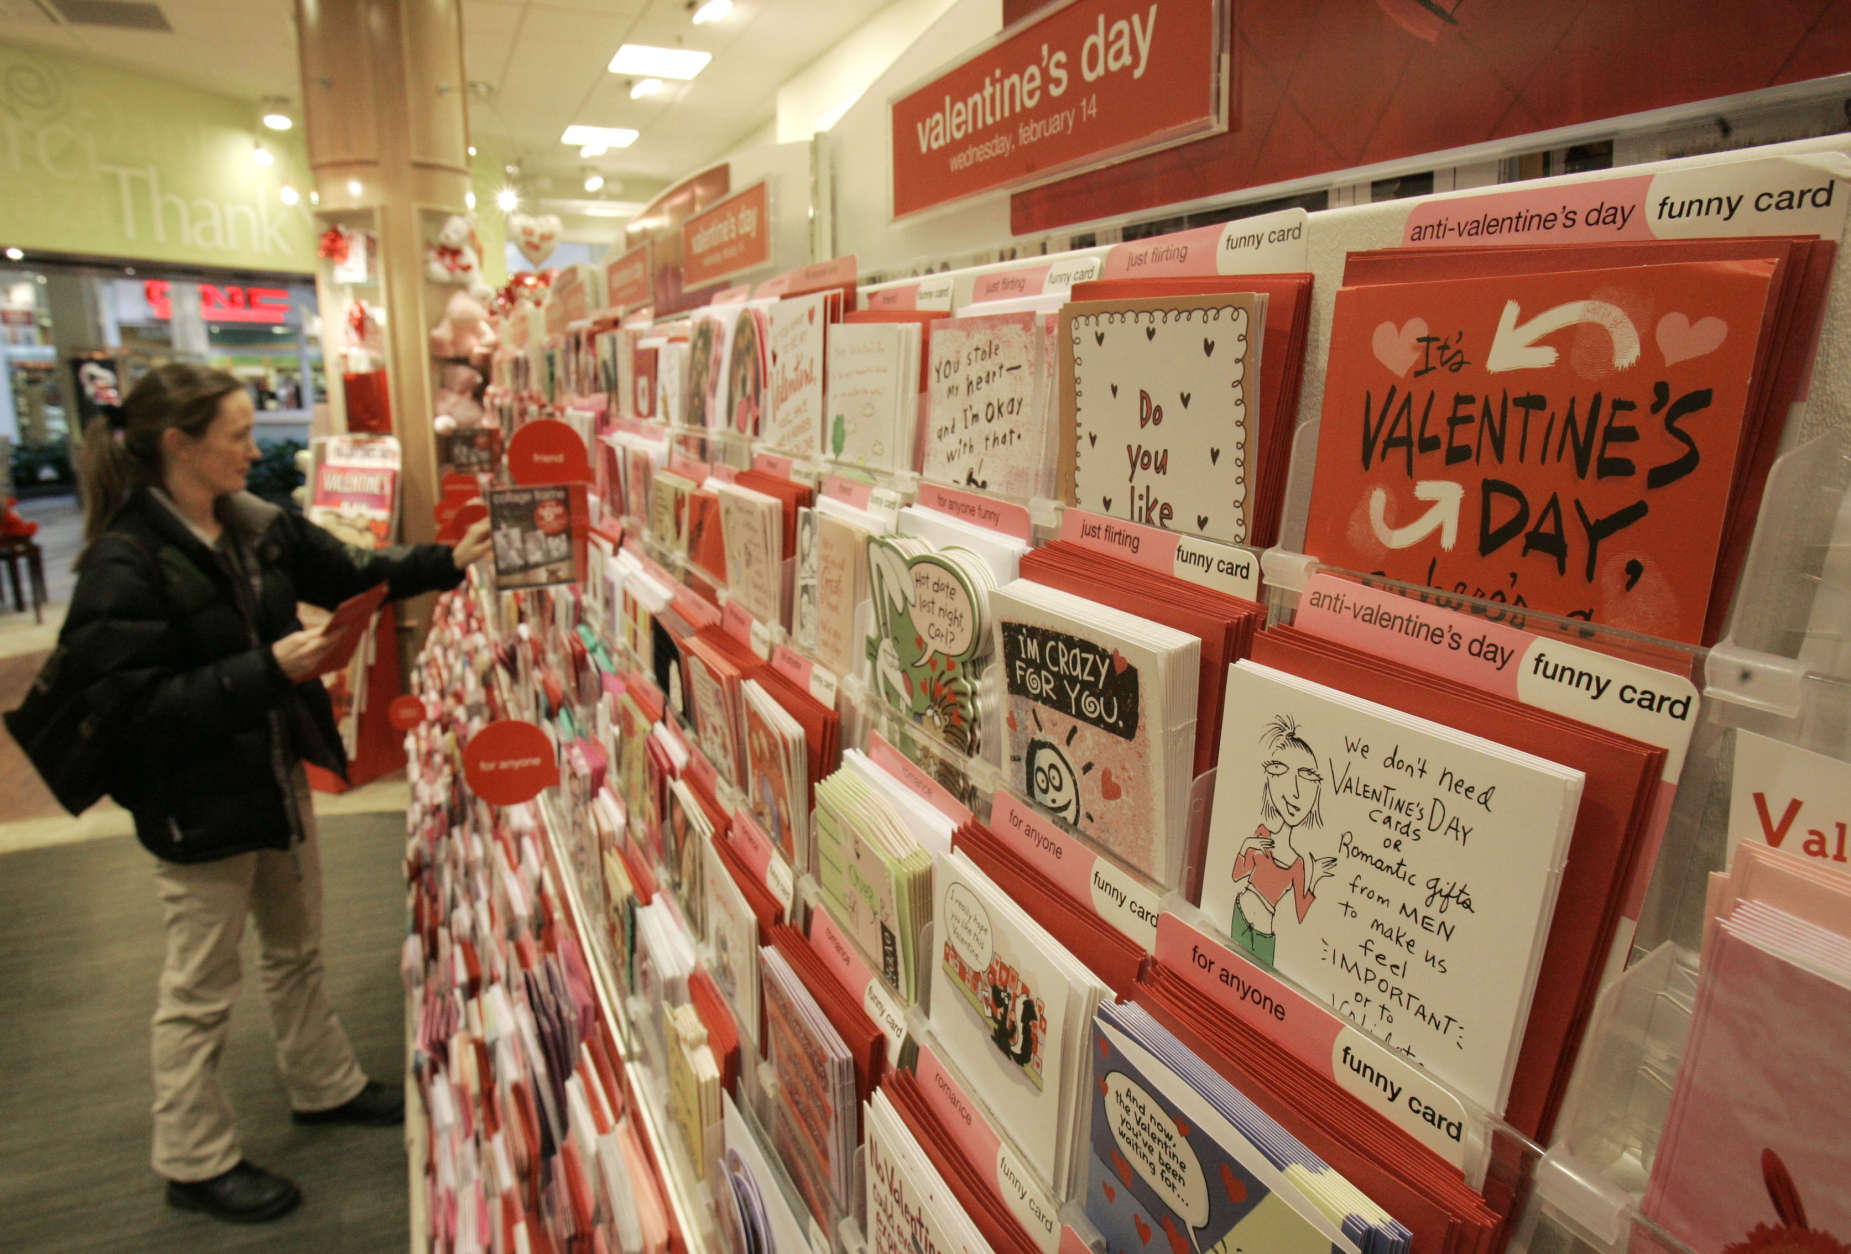 Anti-Valentine Day cards rest on the shelf as Lori Schwartz picks out Valentines Day cards for her children, Wednesday, Feb. 7, 2007, in Beachwood, Ohio. Sensing a growing trend, and more potential customers, Cleveland-based American Greetings Corp. has launched a new line of "anti-Valentine's" cards, expressions for lovers who'd rather be big goofs than big flirts, as well as singles not struck by Cupid's arrow this time of year. (AP Photo/Tony Dejak)